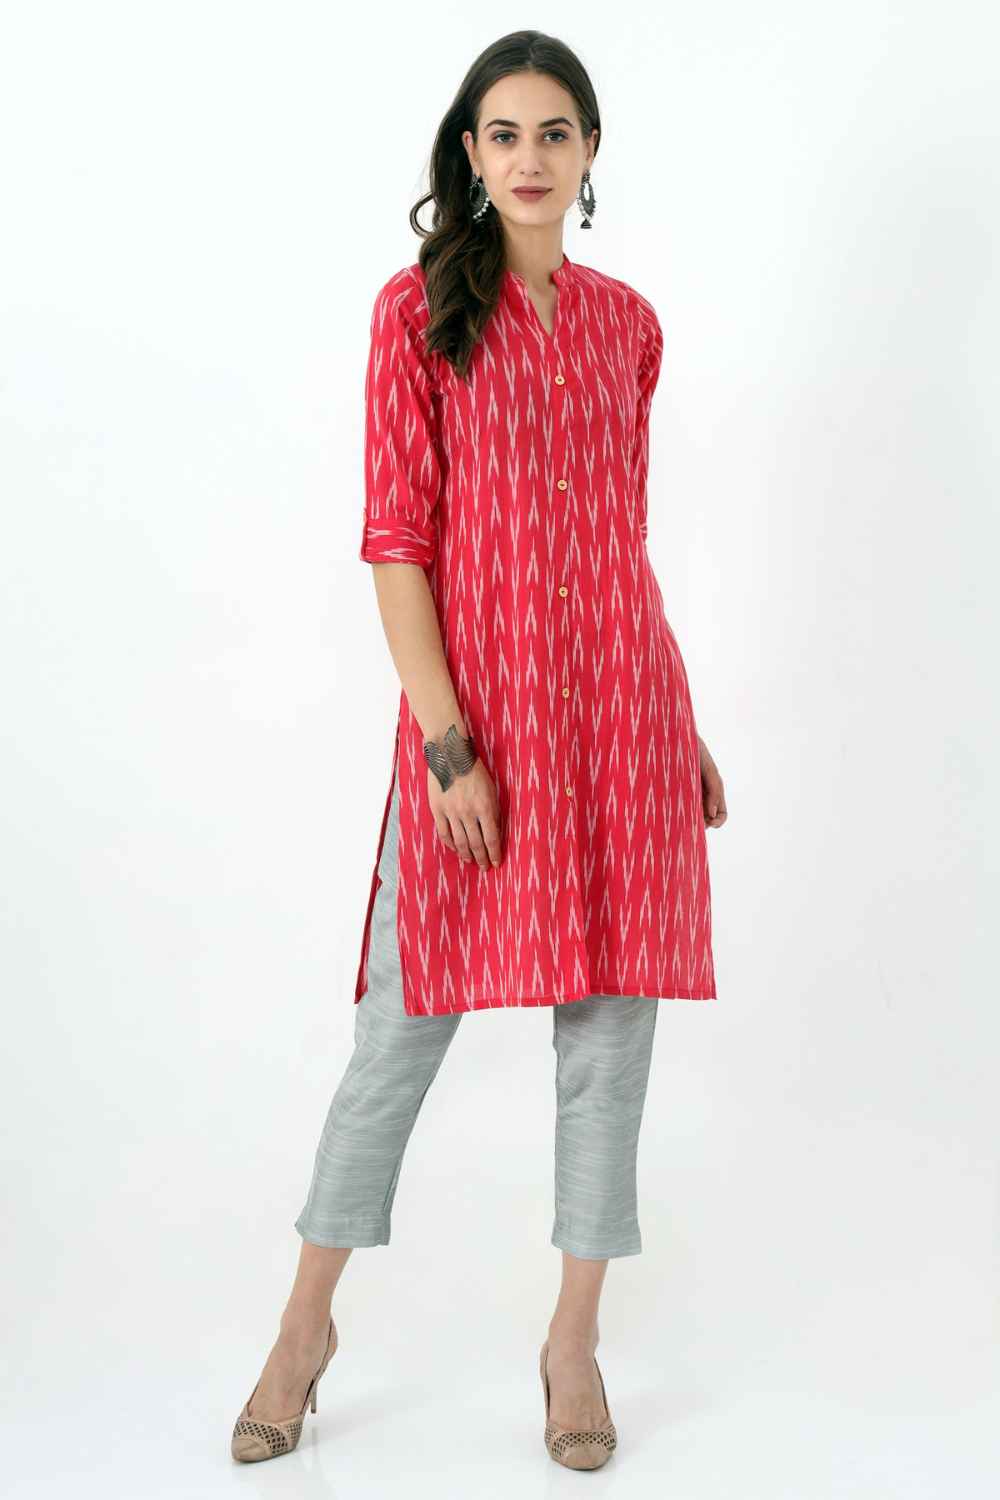 Ikat kurtas for women: A must-have style for your summer ethnic wardrobe |  - Times of India